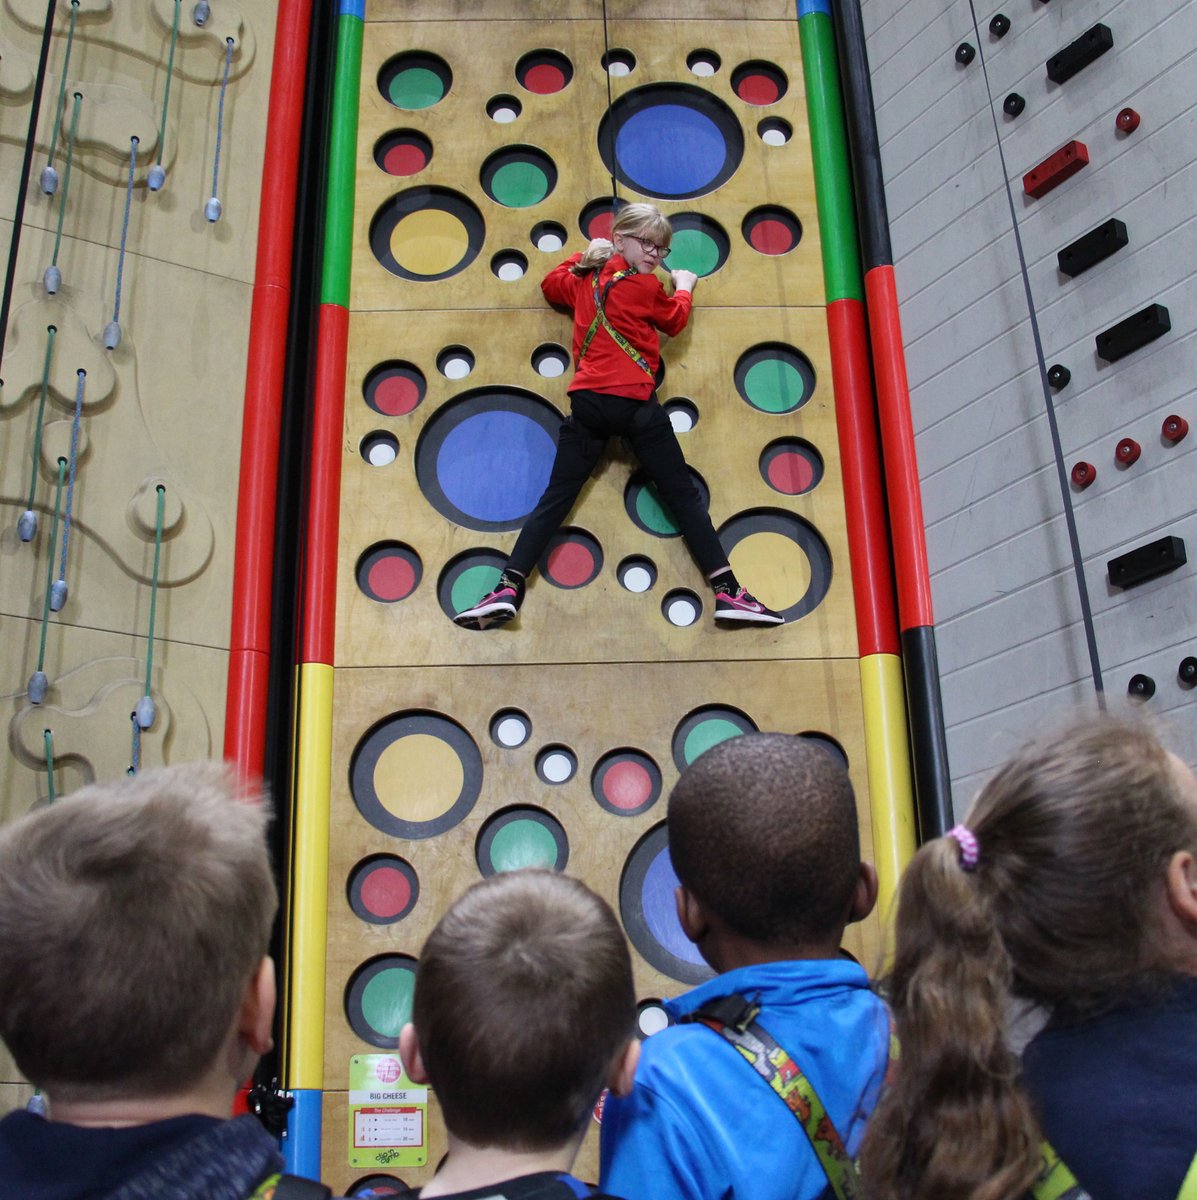 Weekends just got a whole lot more exciting! 🧗‍♂️

Join us for thrilling Clip 'n Climb sessions and elevate your weekend adventures! Experience the joy of climbing fun. 🌟

Book your session through the link in our bio.

#WeekendAdventures #ThrillingFun #ClipnClimb #bournemouthpier